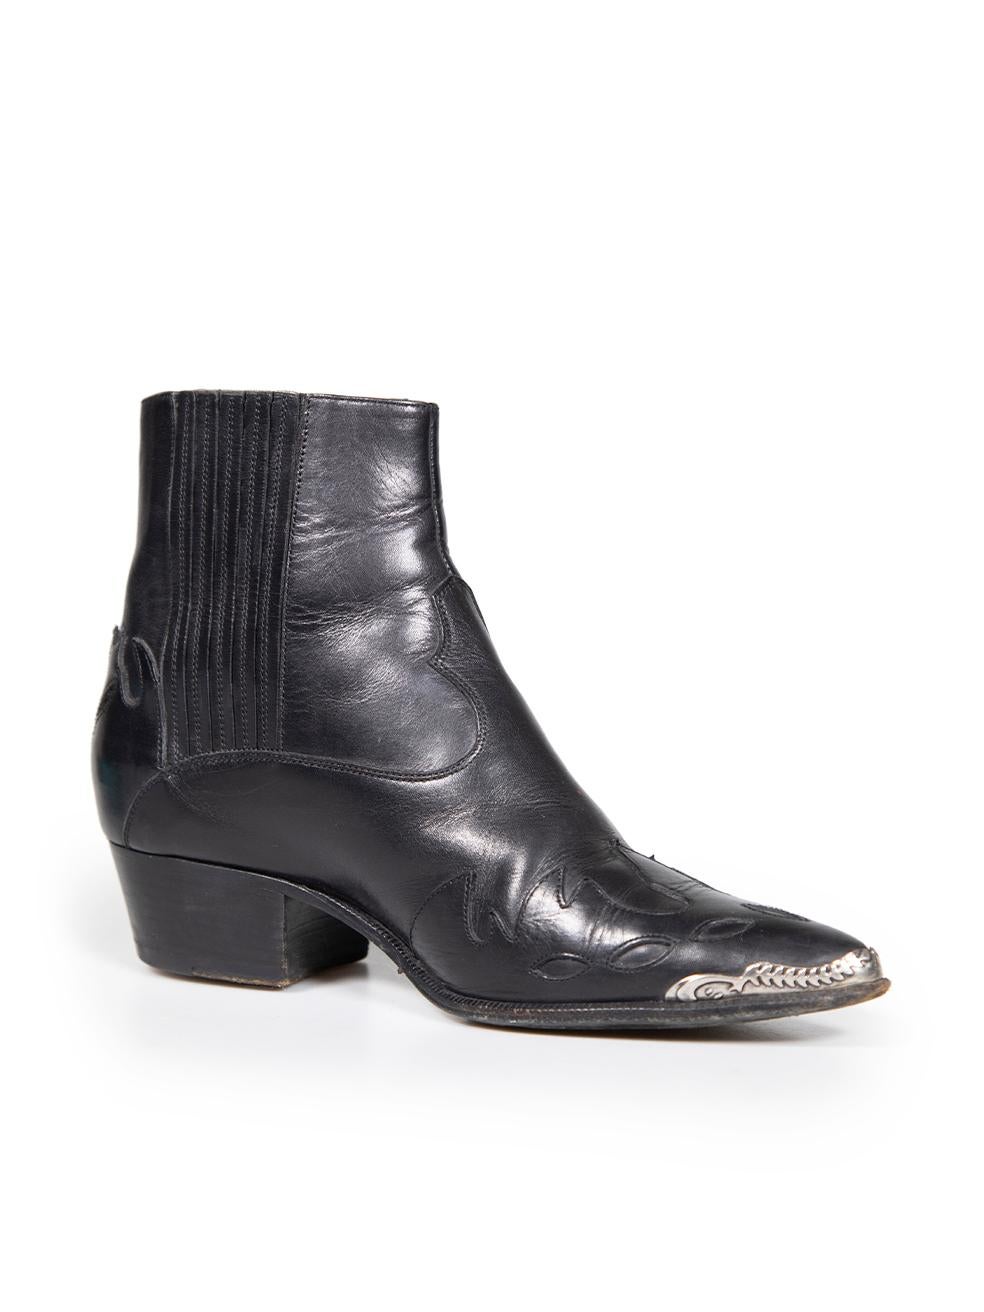 CONDITION is Good. Minor wear to boots is evident. Wear to soles and pointed toe tips. There are some light scratches to the heel on this used Saint Laurent designer resale item. This item comes with original dust bag and box.
 
 Details
 Black
